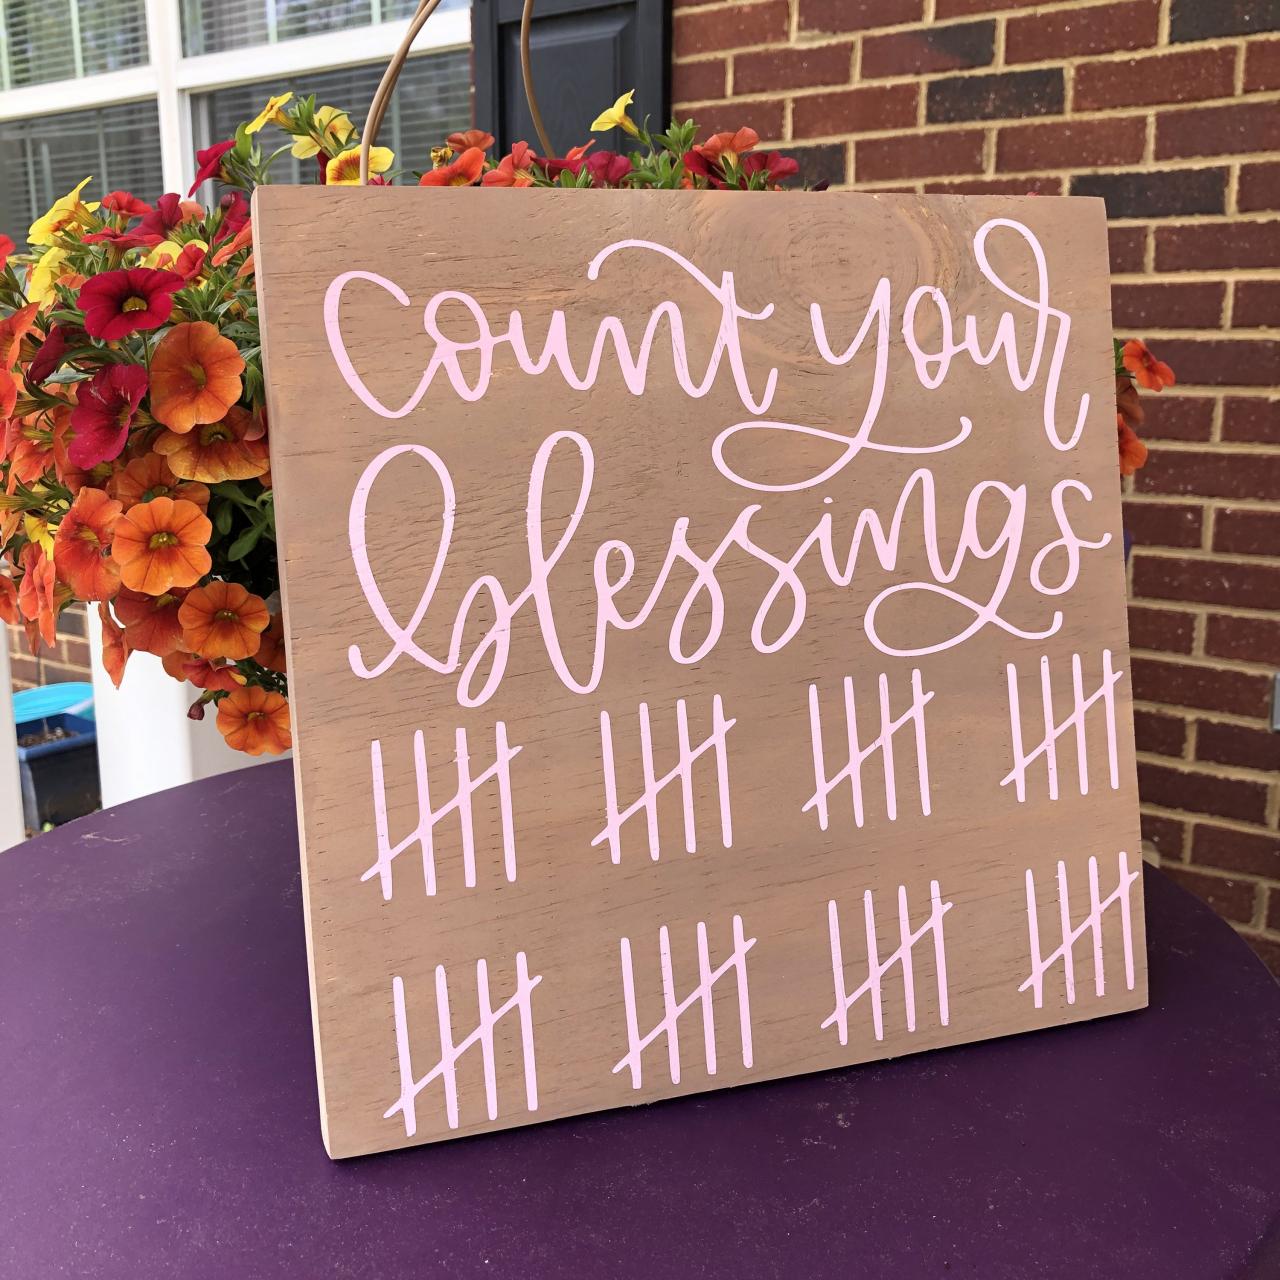 Count Your Blessings Hand Paintedwood Sign, 12x12, Farmhouse Blessings Sign, Farmhouse Decor, Blessings